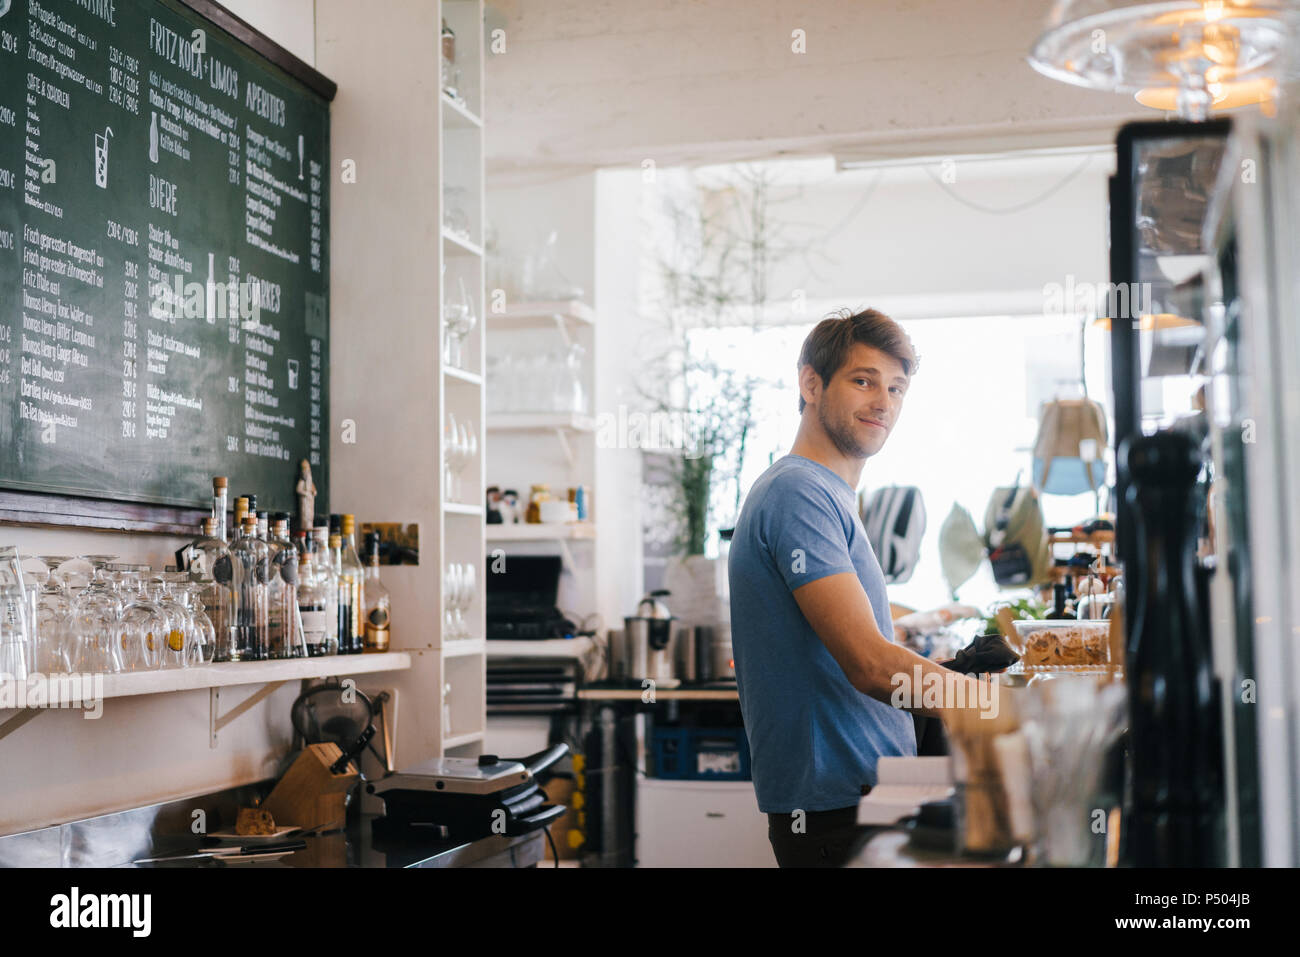 Portrait of smiling man in a cafe Stock Photo